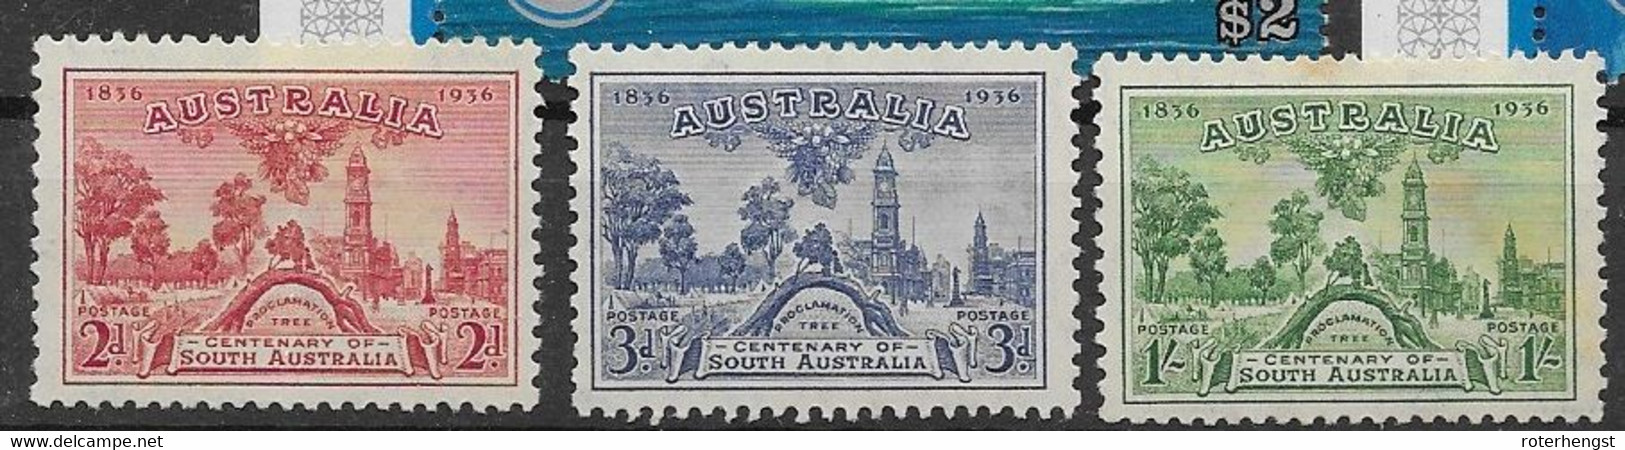 Australia Set Mh * But Green Stamp With Rust/stain Spots On Gum (25 Euros) 1936 - Nuevos